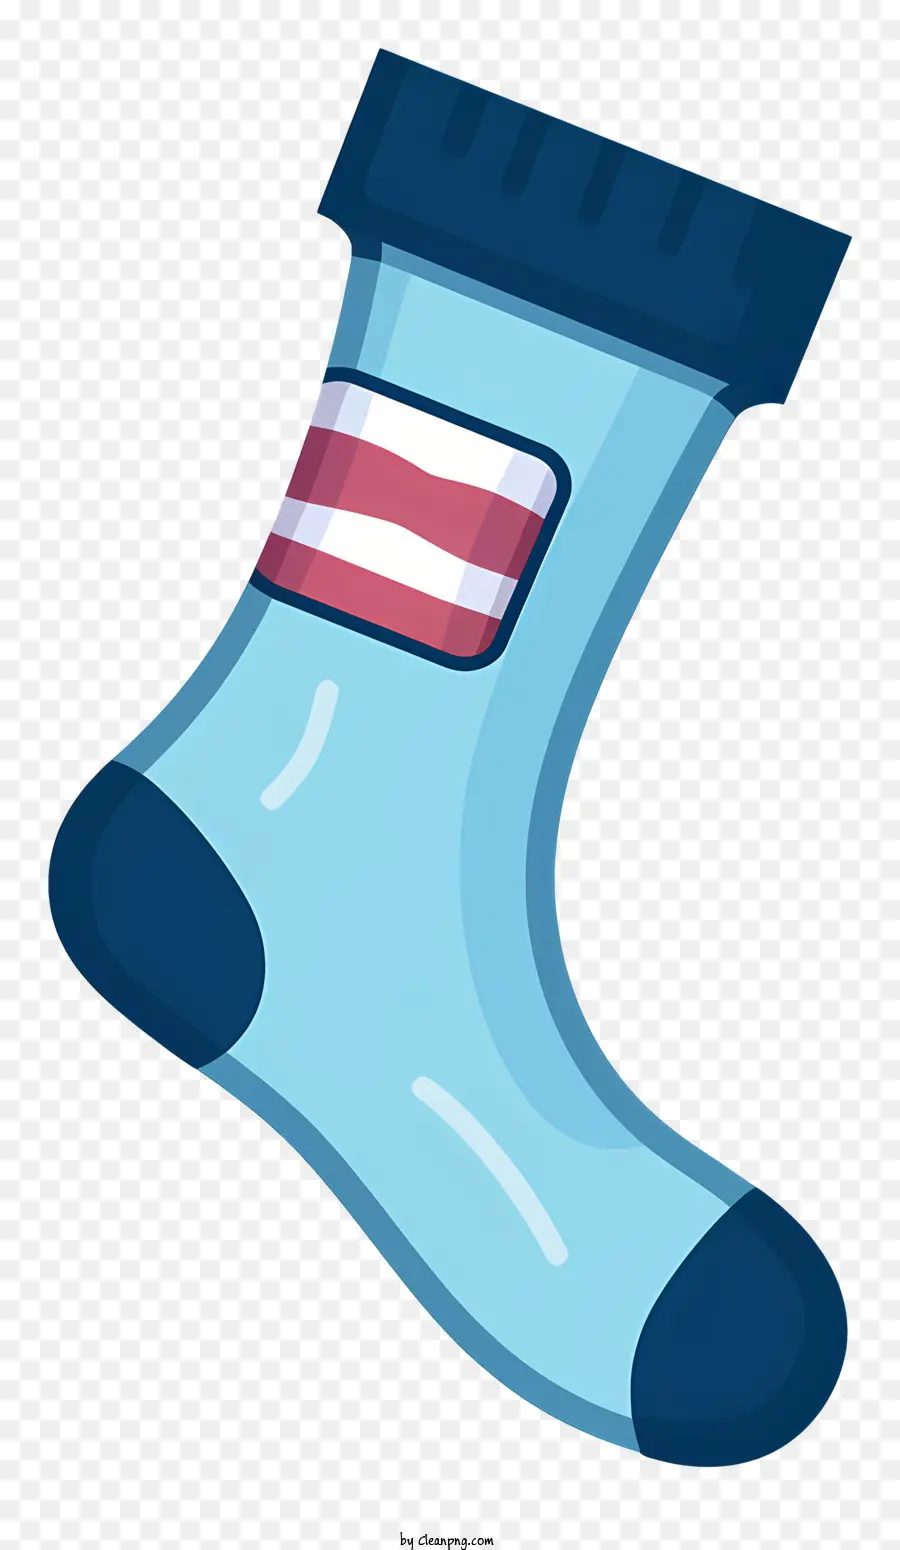 blue sock red and white stripes hanging sock black background sock fashion